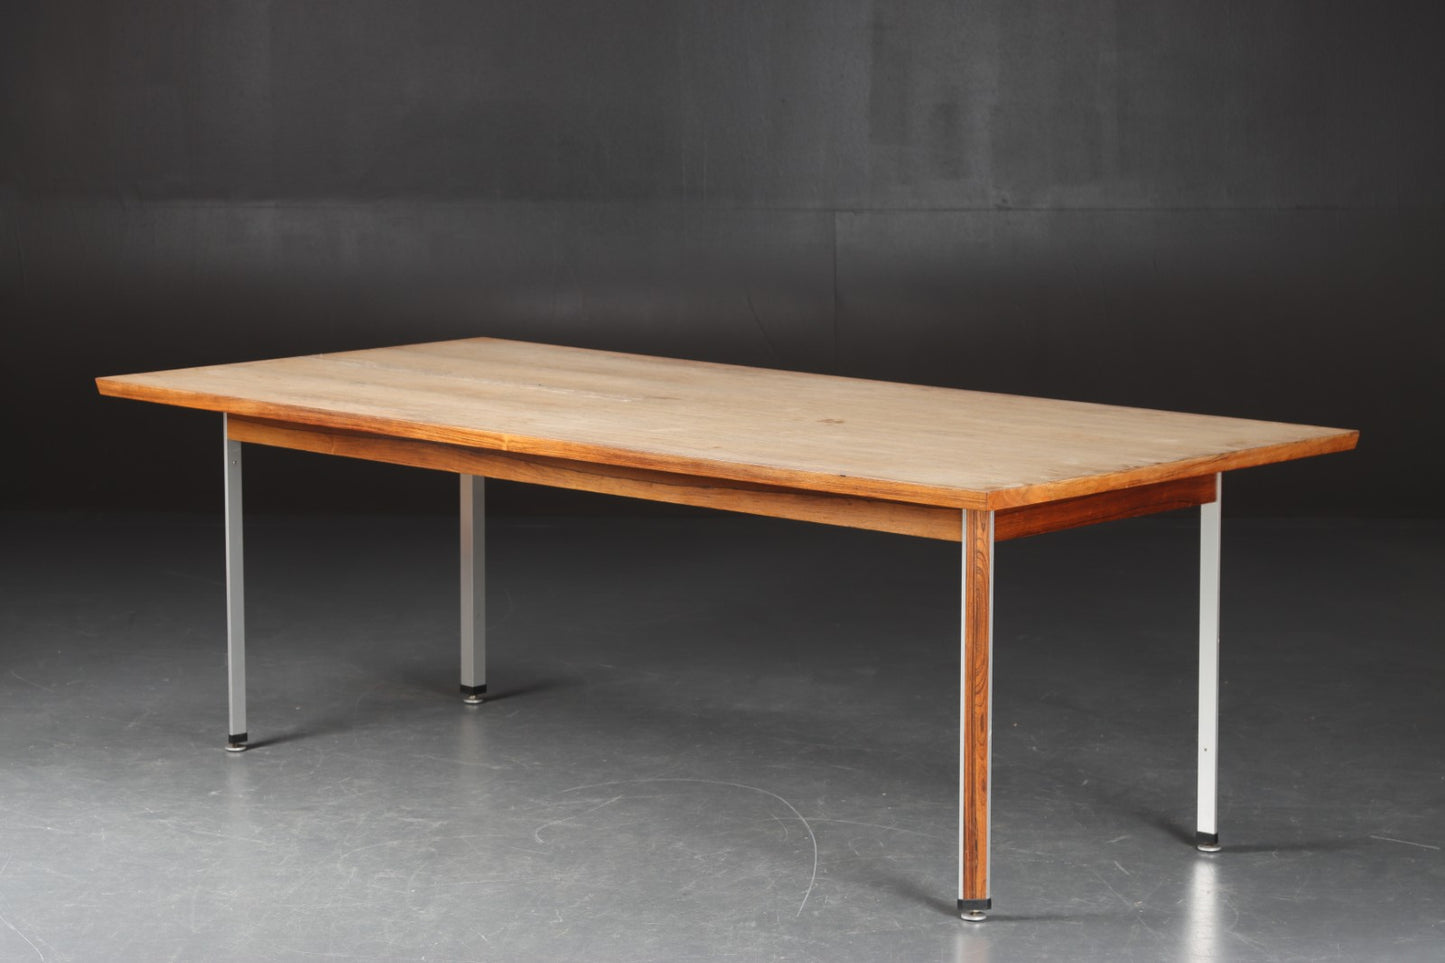 Finn Juhl. Conference / dining table in rosewood from the 'Diplomat series'.